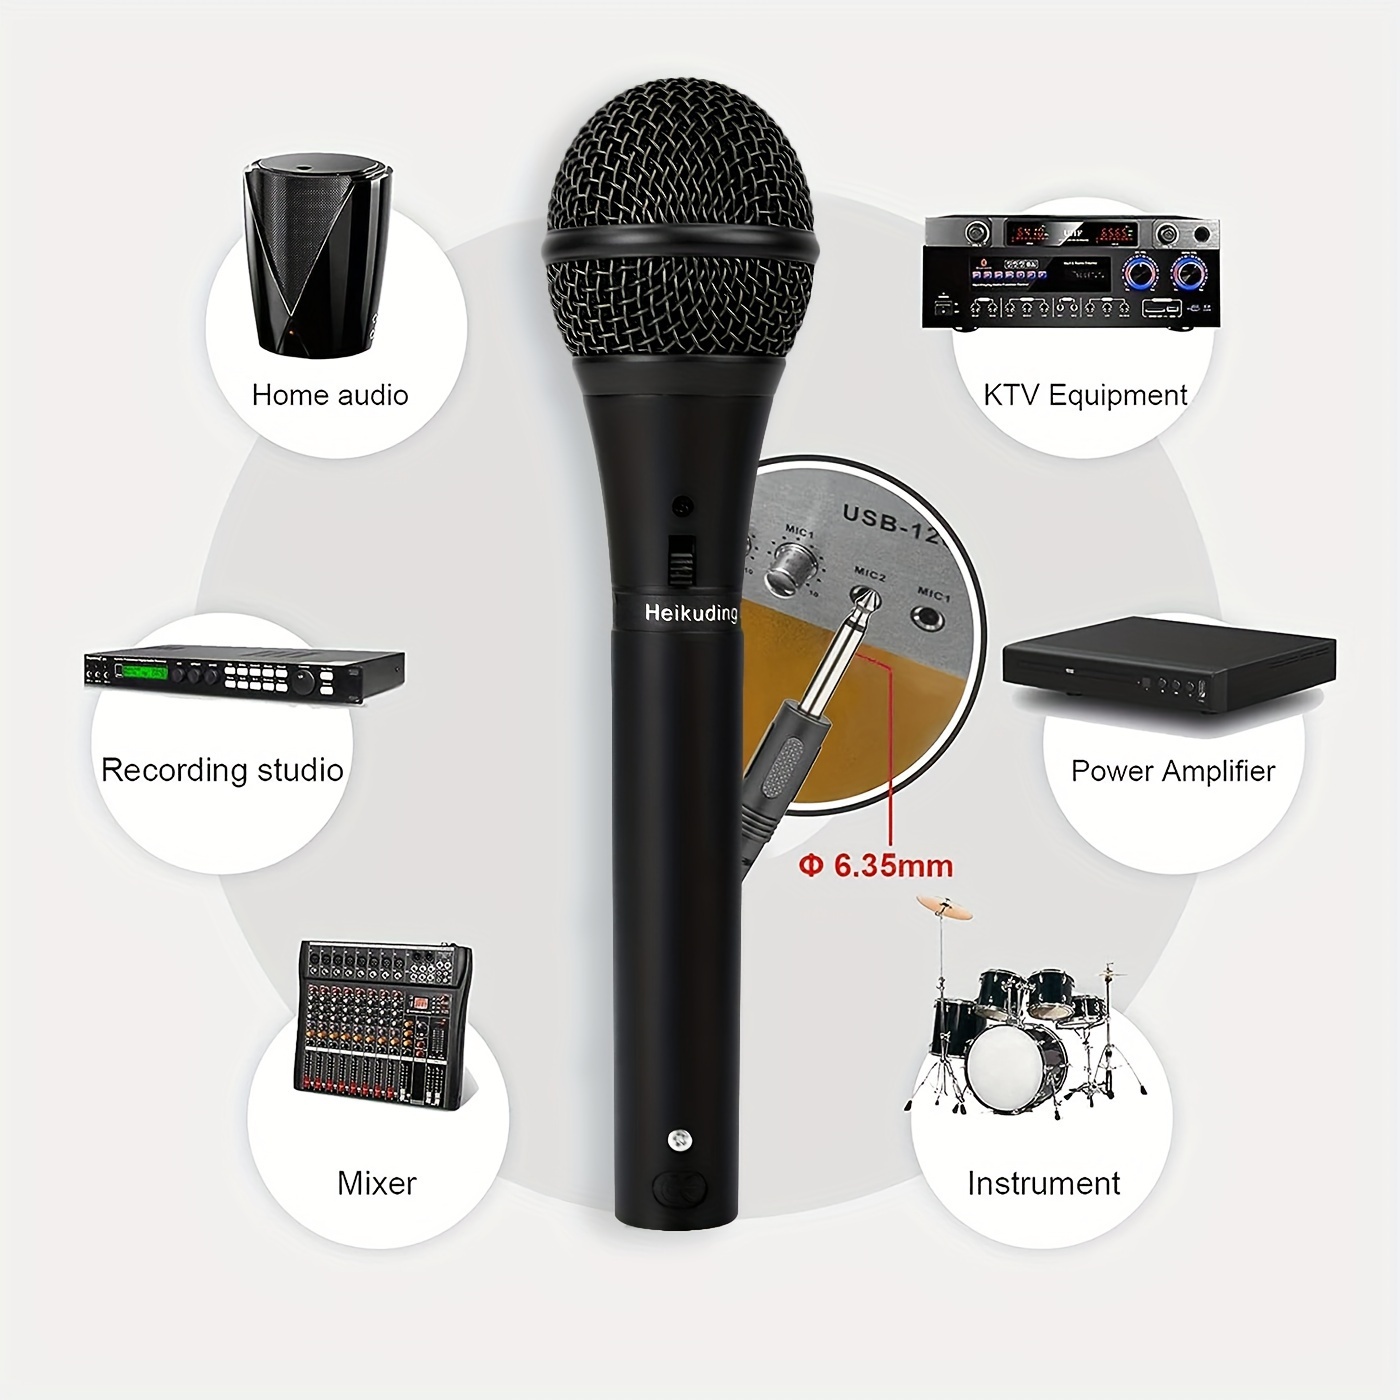 10Ft Wired Handheld Dynamic Microphone Professional 1/4 Mic for Karaoke  Speech